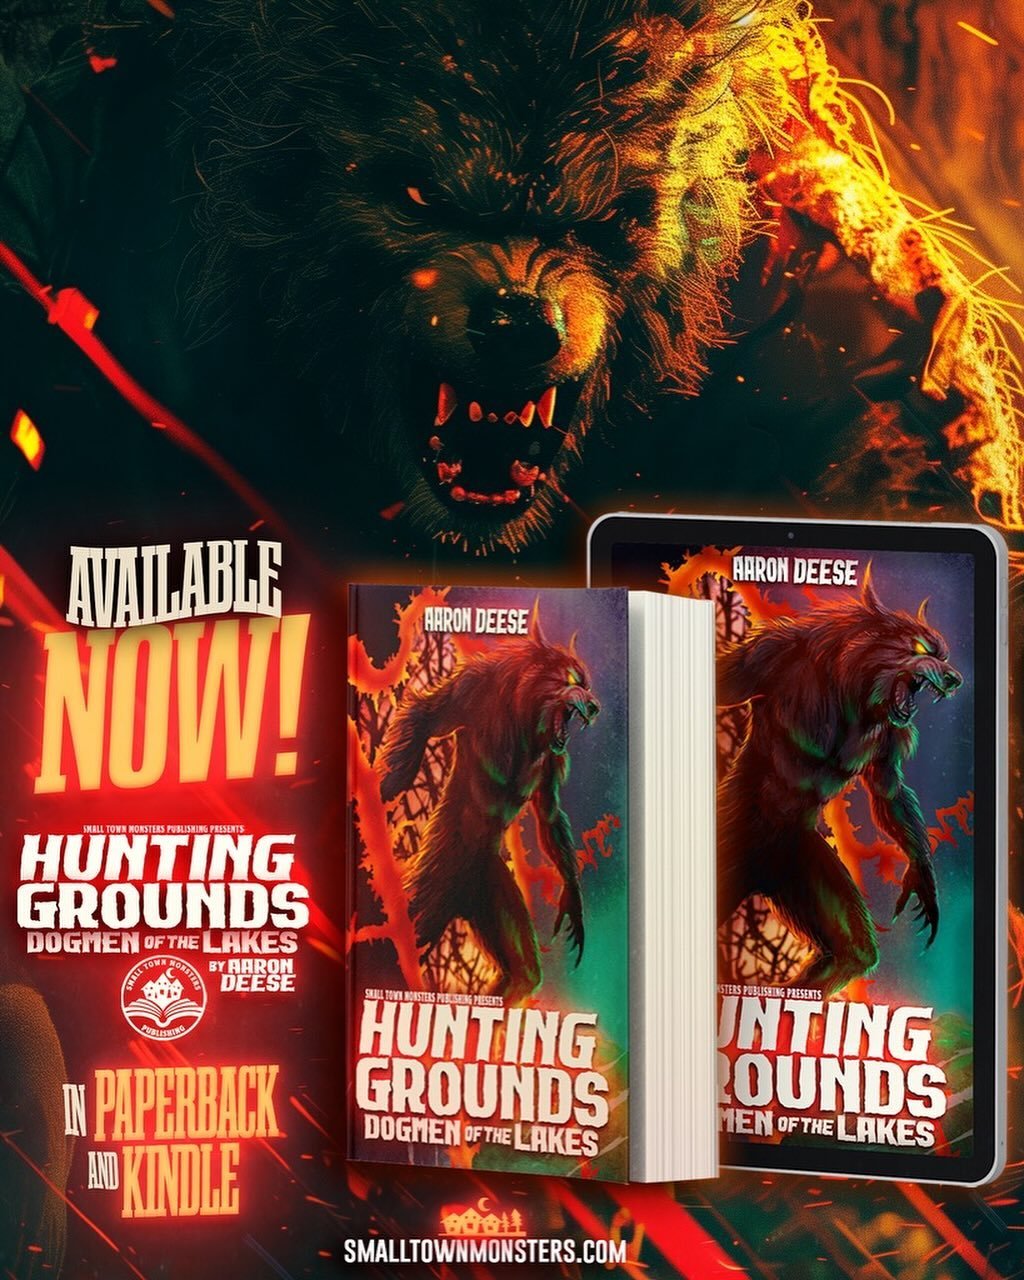 &ldquo;It is here, in the words of Sondheim, that we journey into the woods.&rdquo;

Hunting Grounds: Dogmen of The Lakes is now available at smalltownmonsters.com/shop and Amazon. Find out what many say lurks in the shadowed forests of the Land Betw